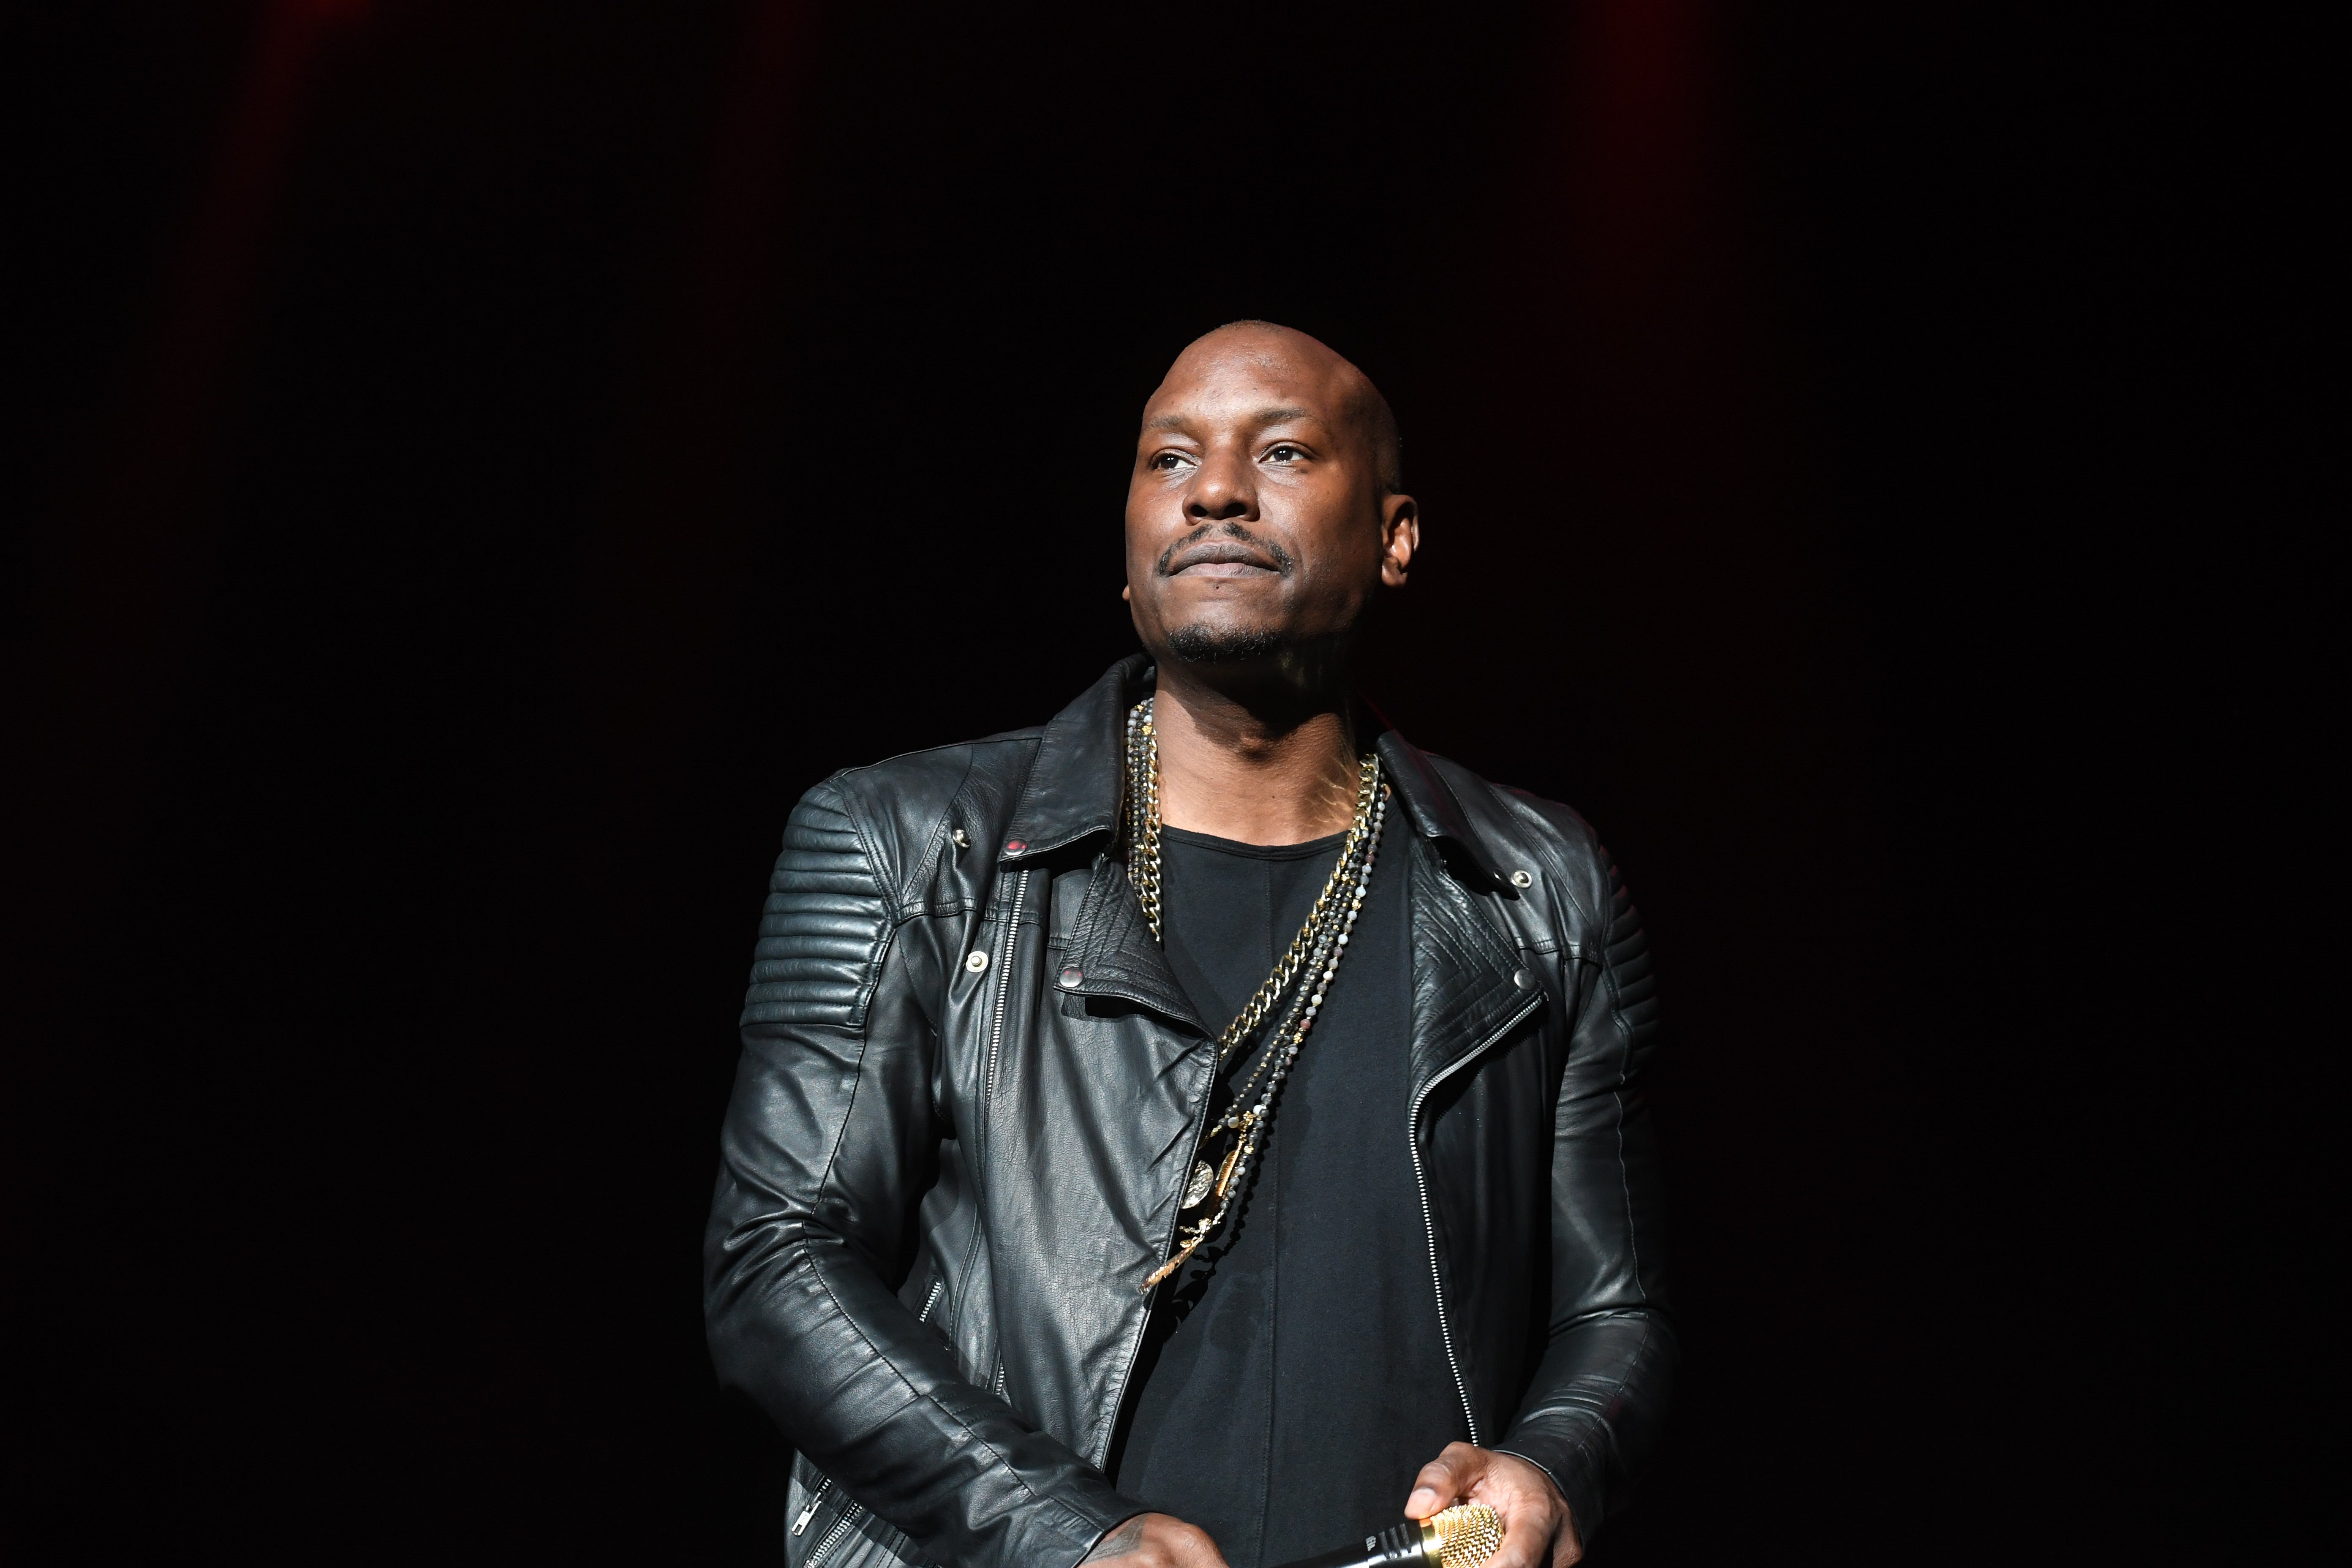 Tyrese Claims Medication Made Him Lie About Wife’s Pregnancy